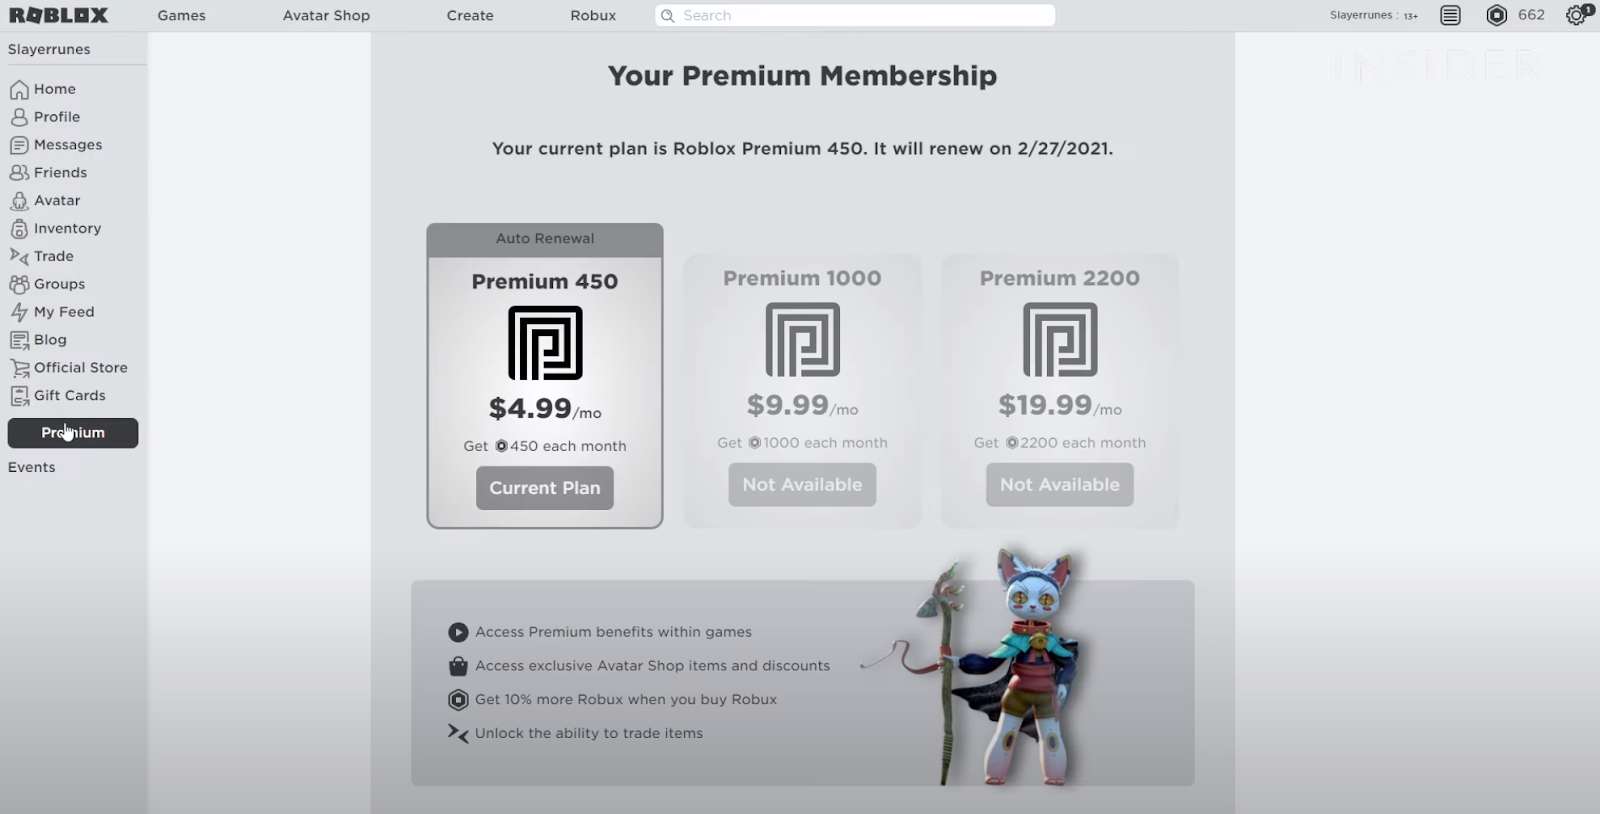 How To Trade In Roblox In 4 Simple Steps Softonic - roblox games with premium benefits